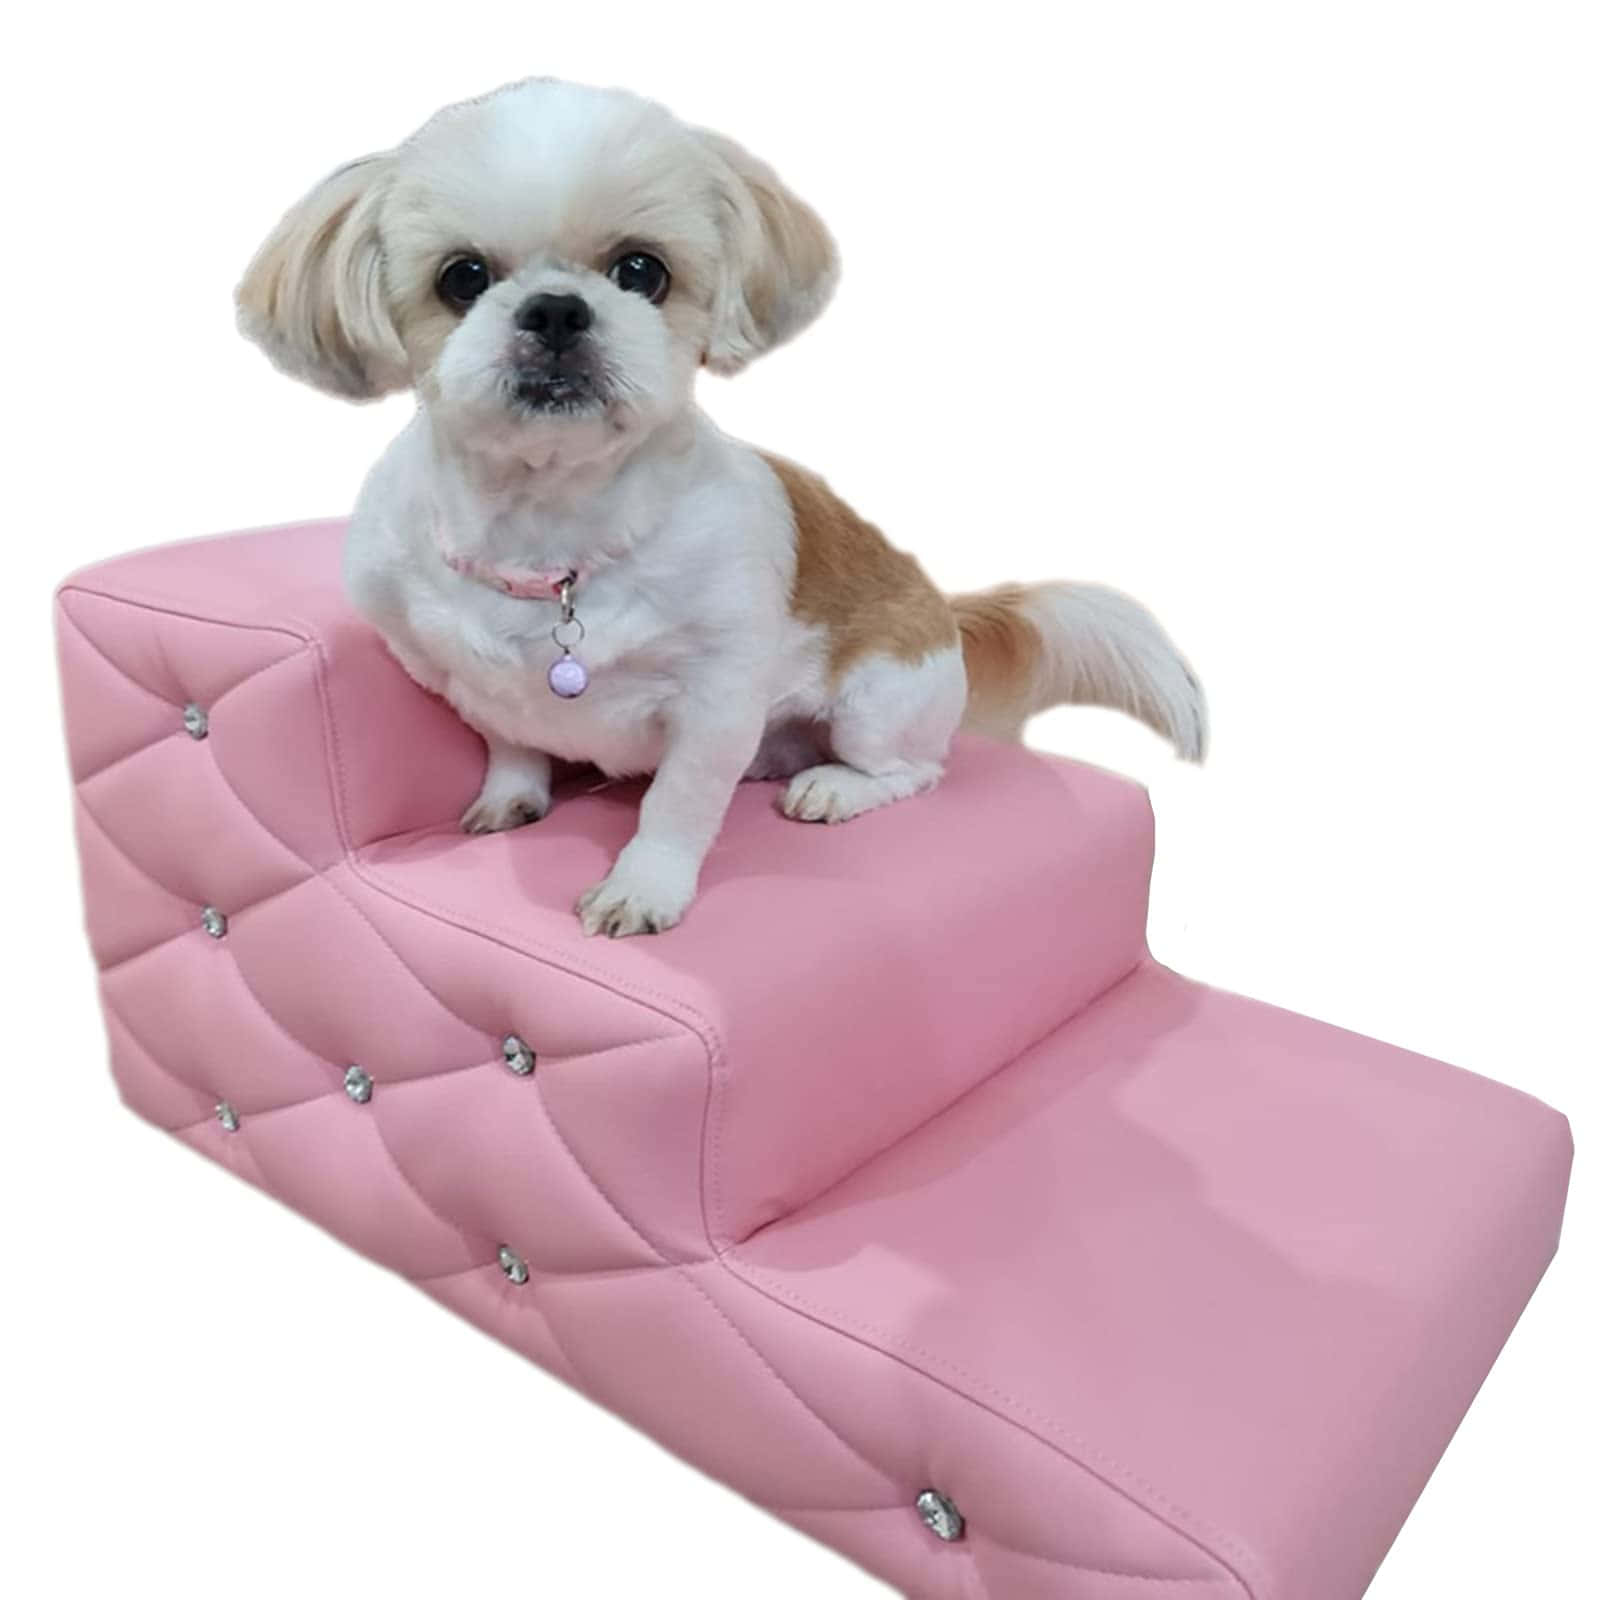 A Small Dog Sitting On A Pink Padded Step Stool Wallpaper